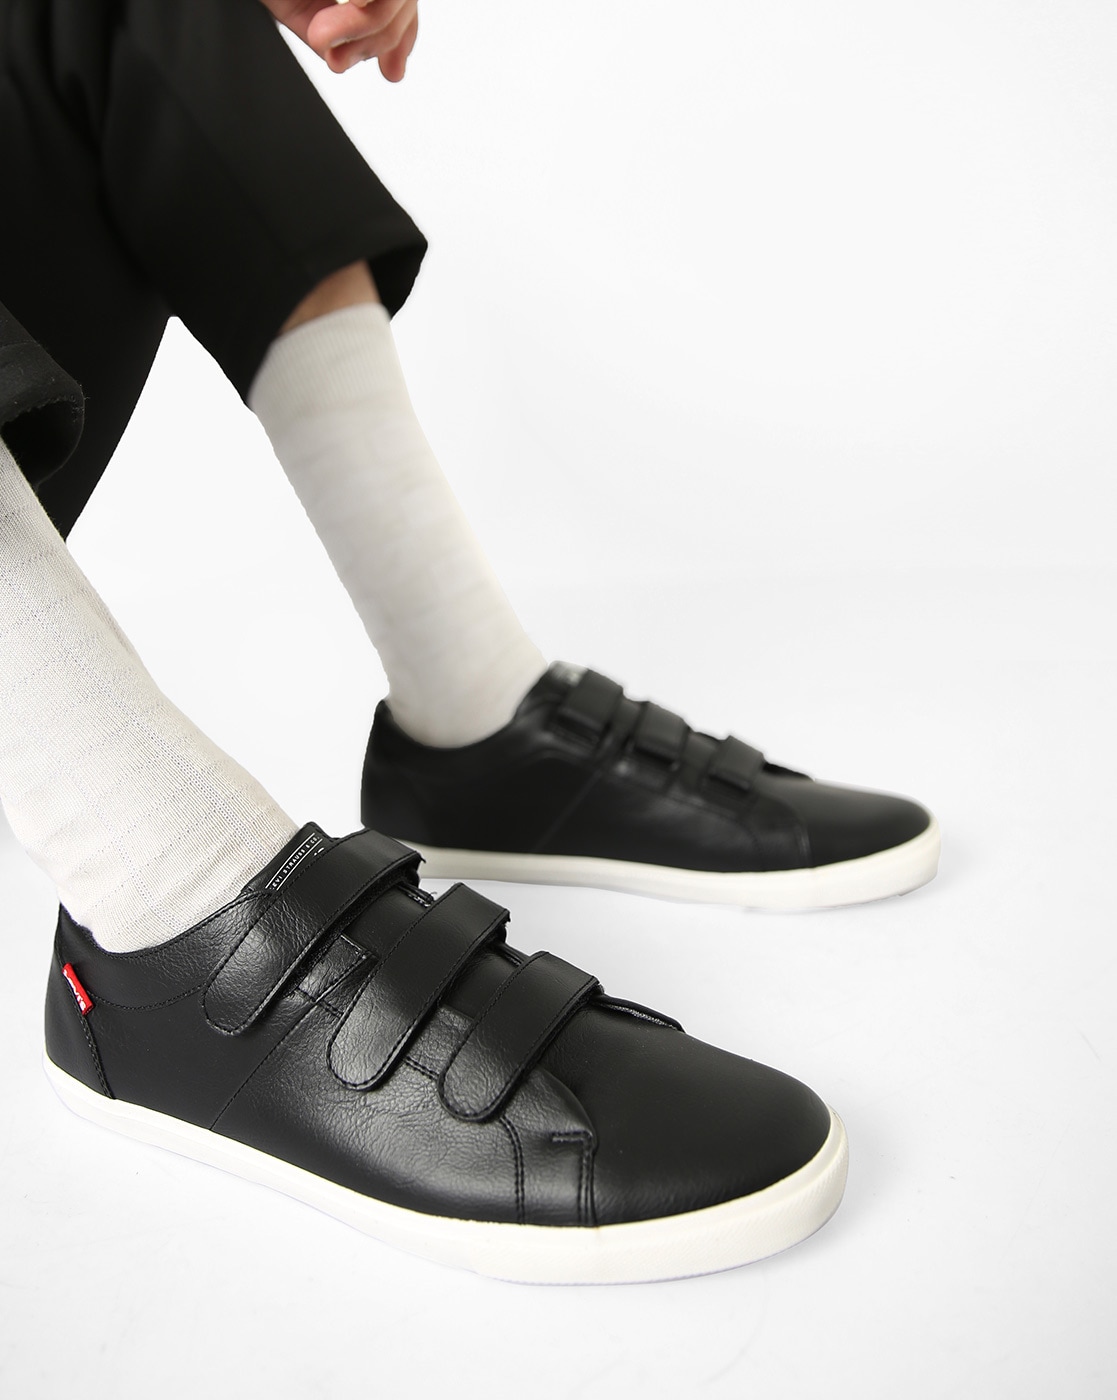 ECCO® Stylish Sneakers for Men - Shop Online Now